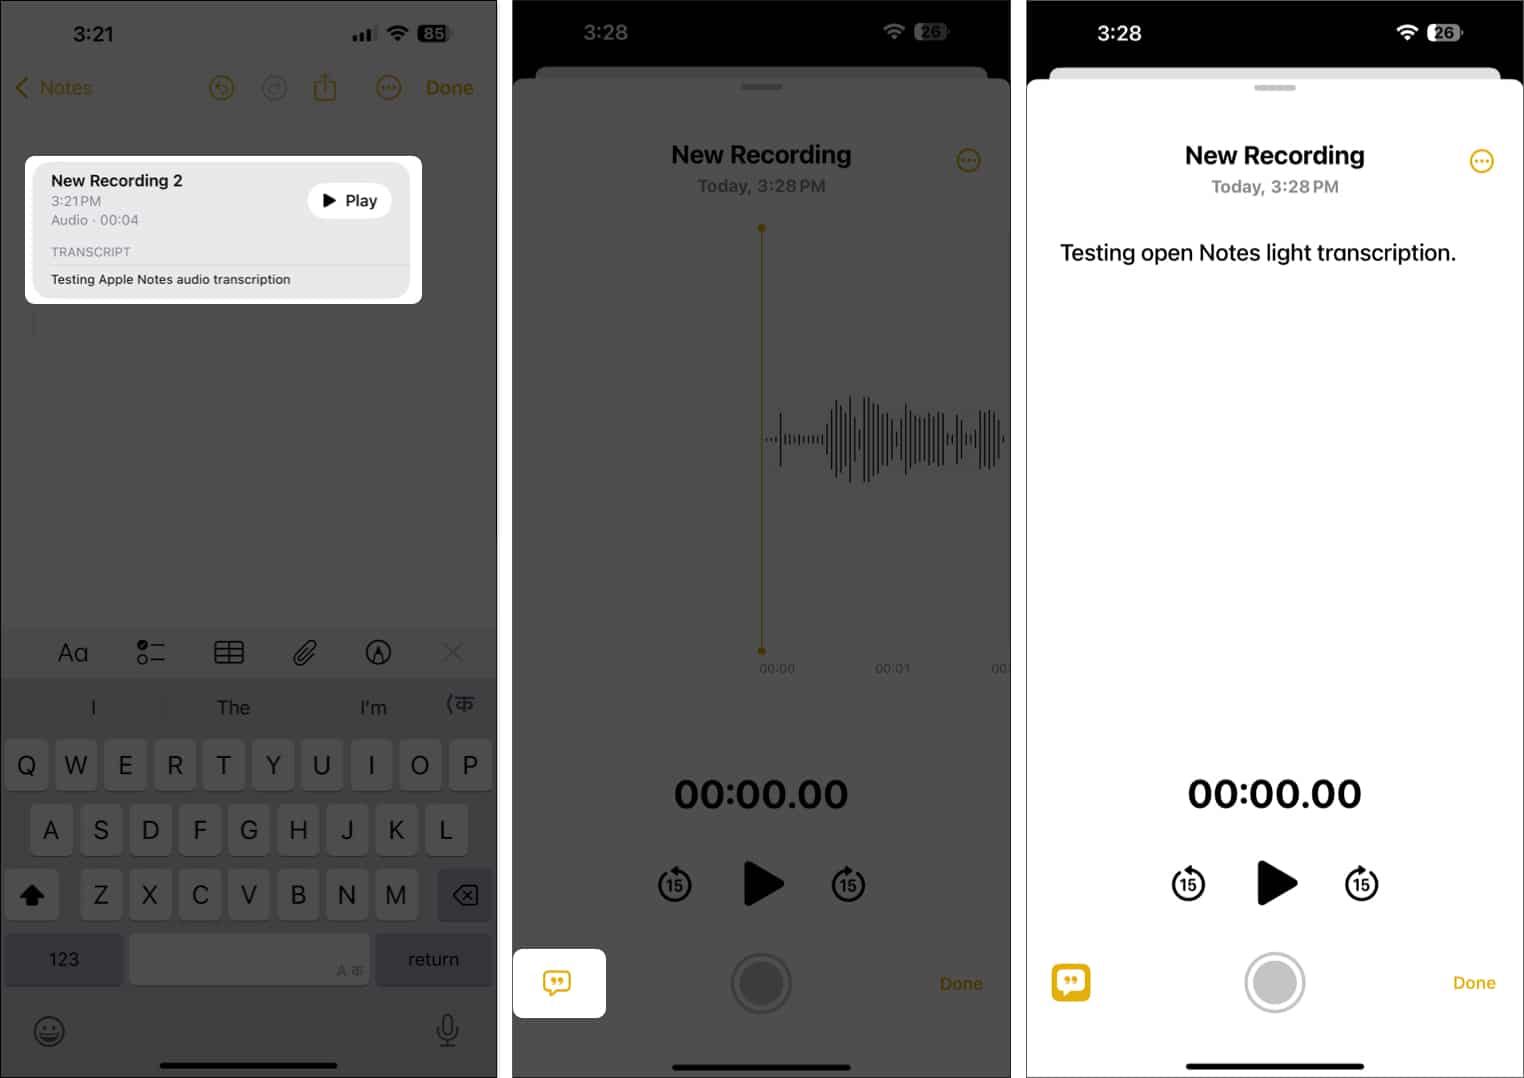 Tap on Quotation box to view audio transcription on iPhone